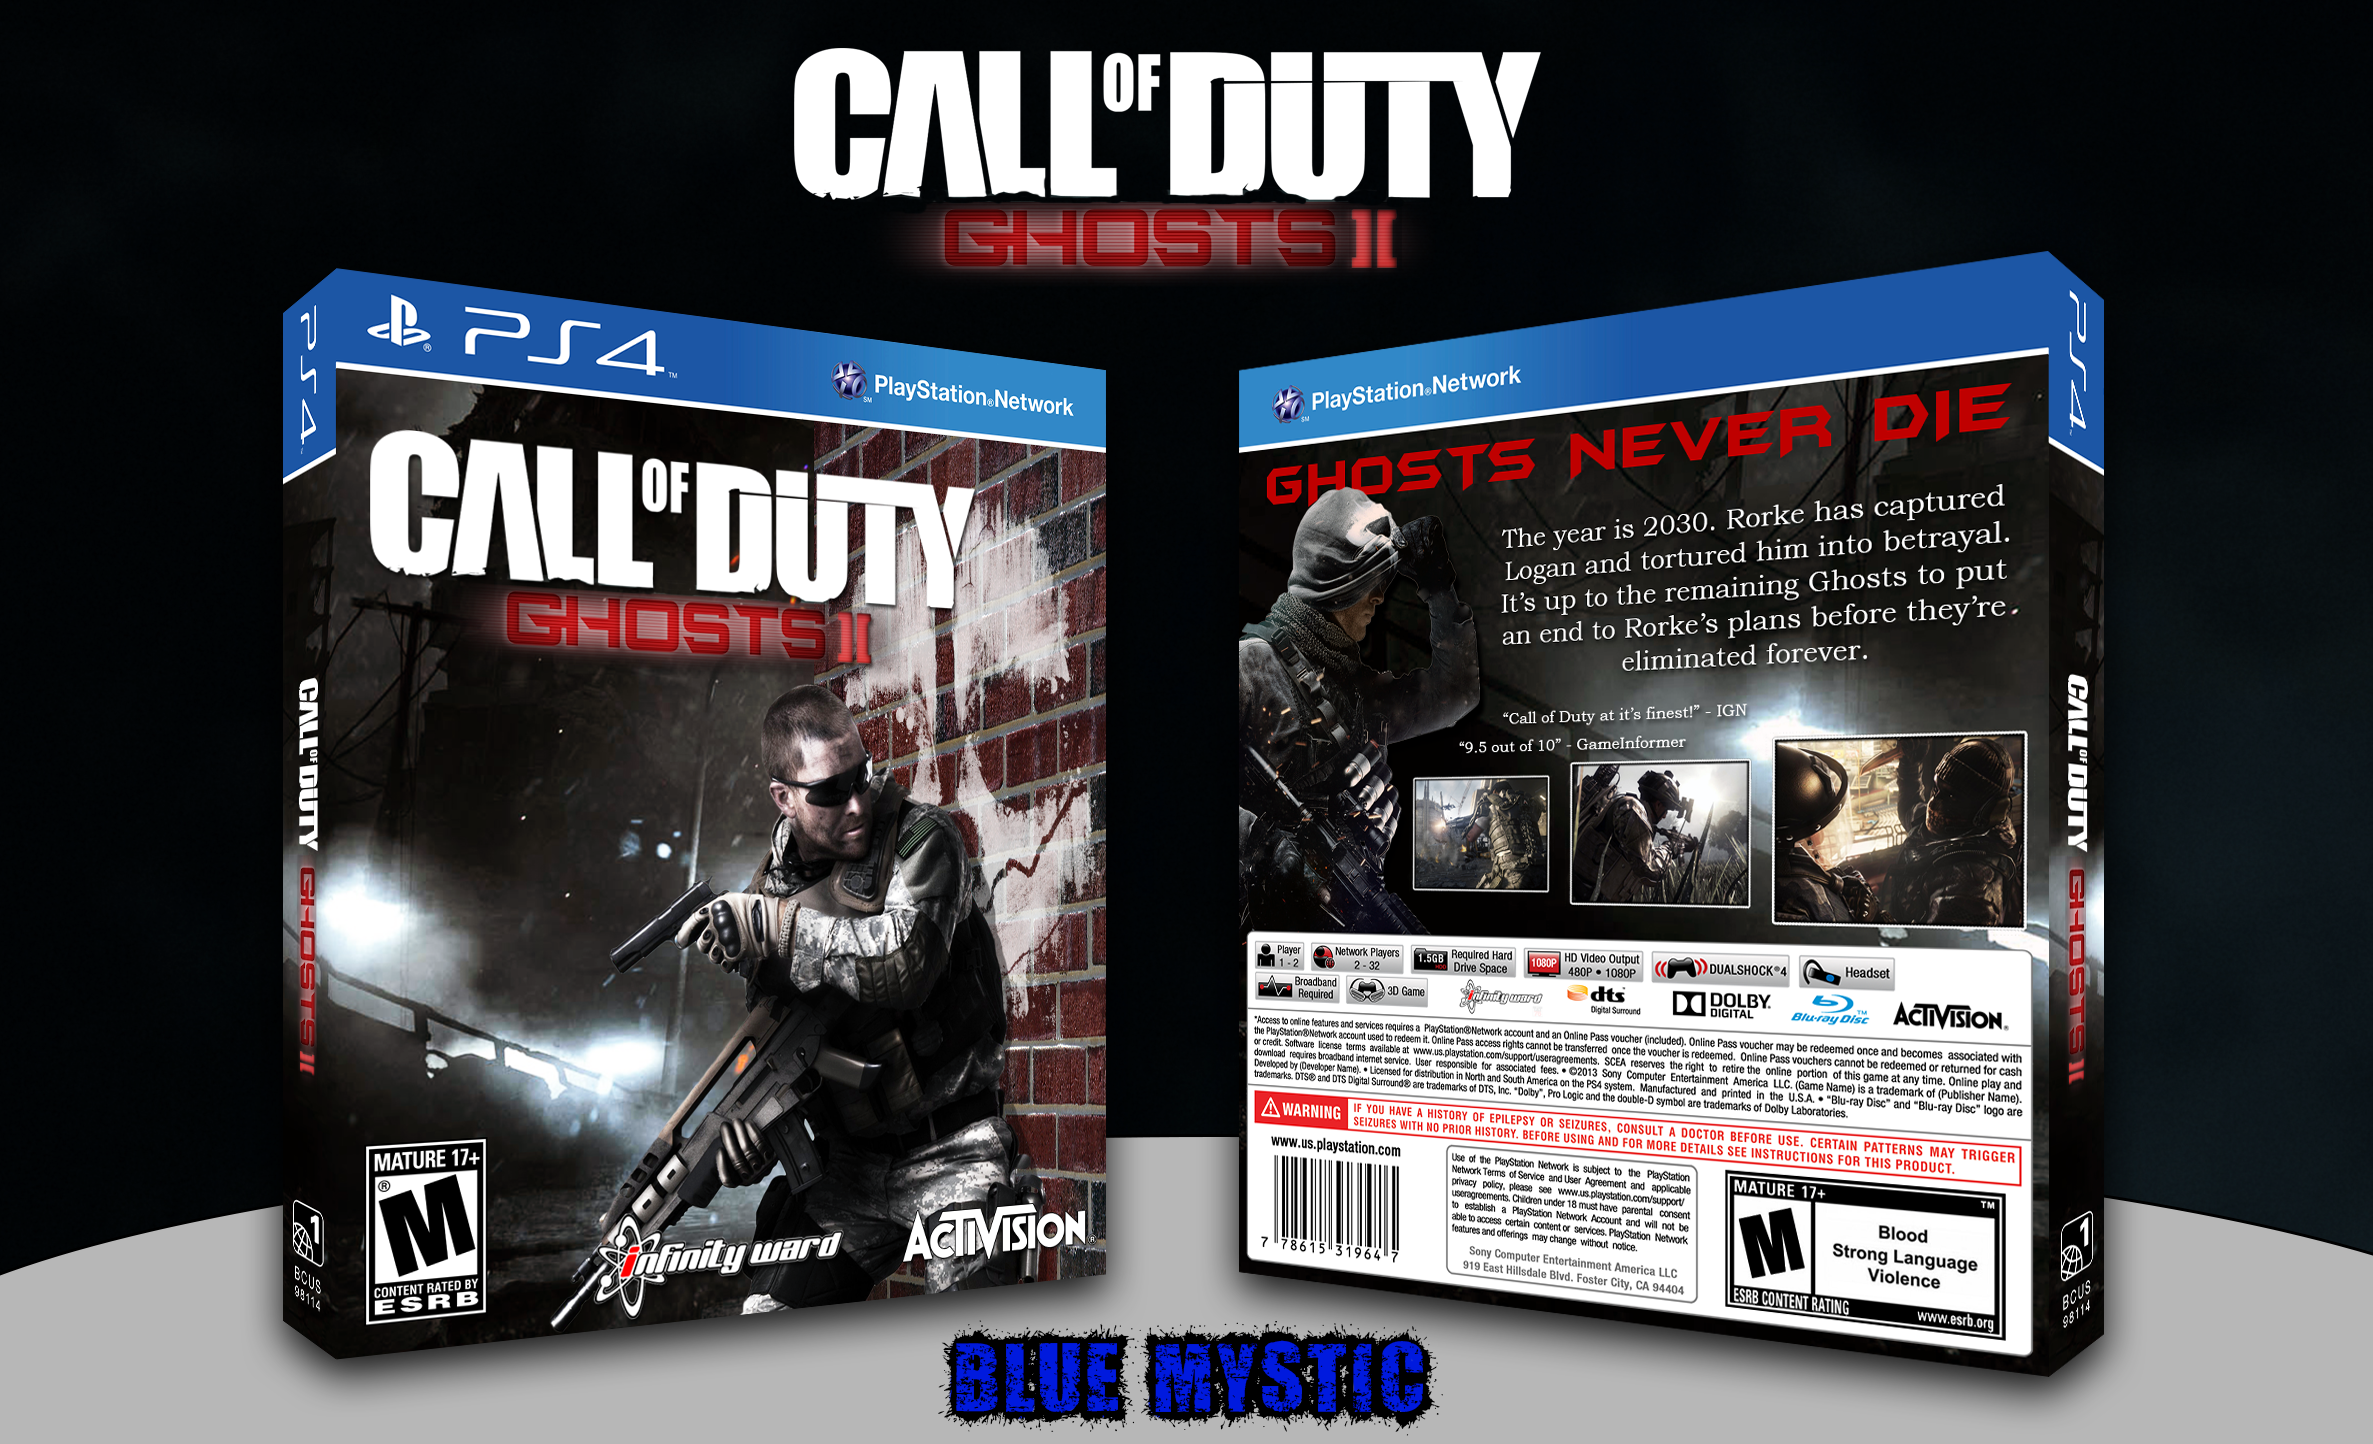 Call of Duty: Ghosts II box cover